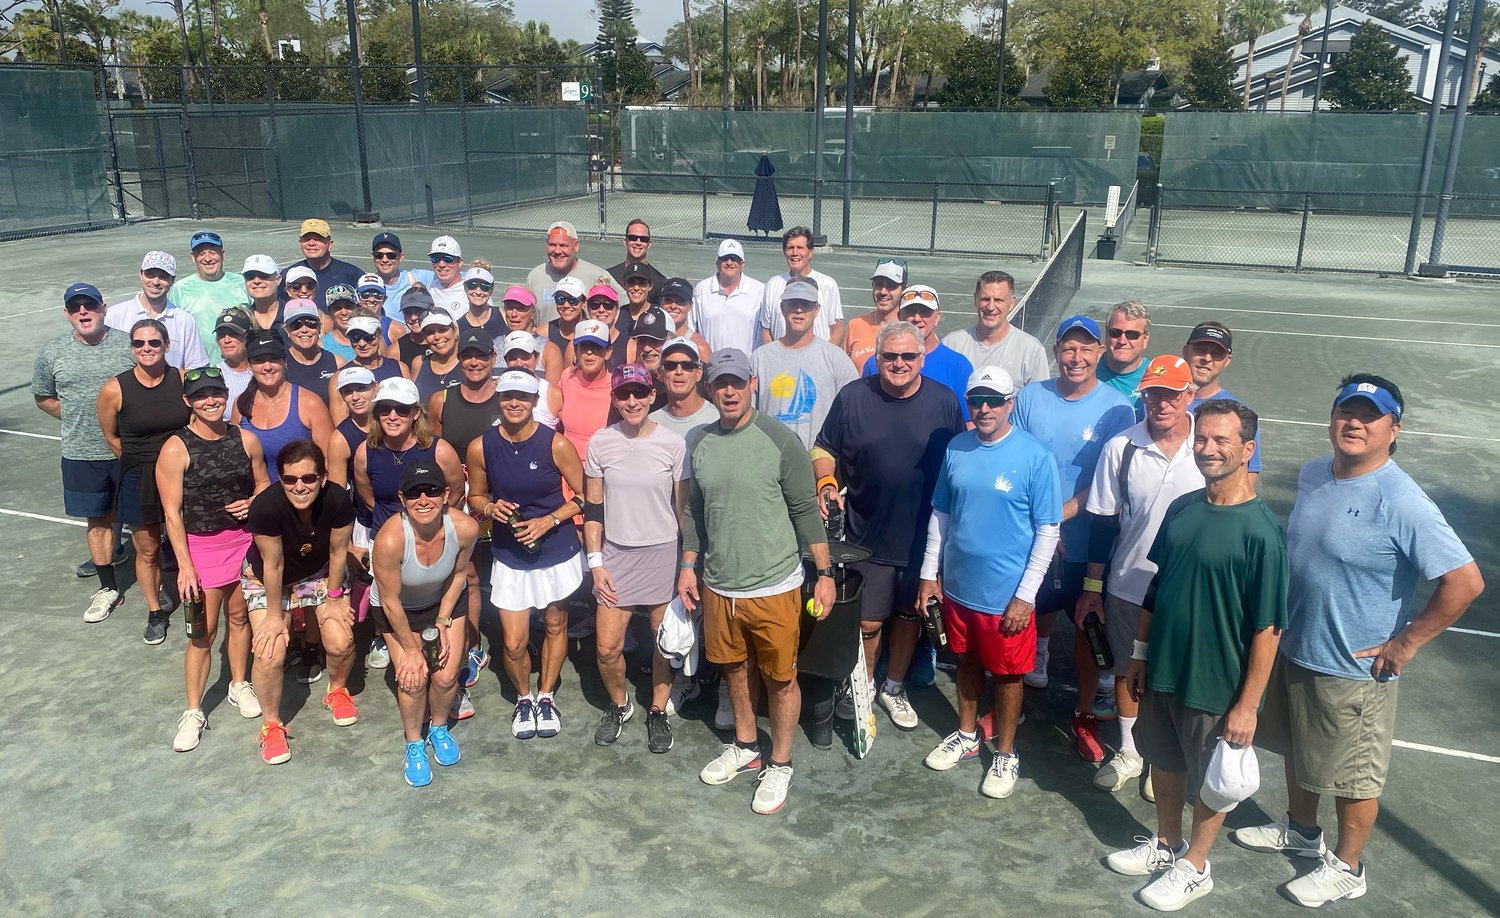 The “Battle of the Beaches” tennis tournament participants featuring the Ponte Vedra Inn & Club versus the Sawgrass Country Club.